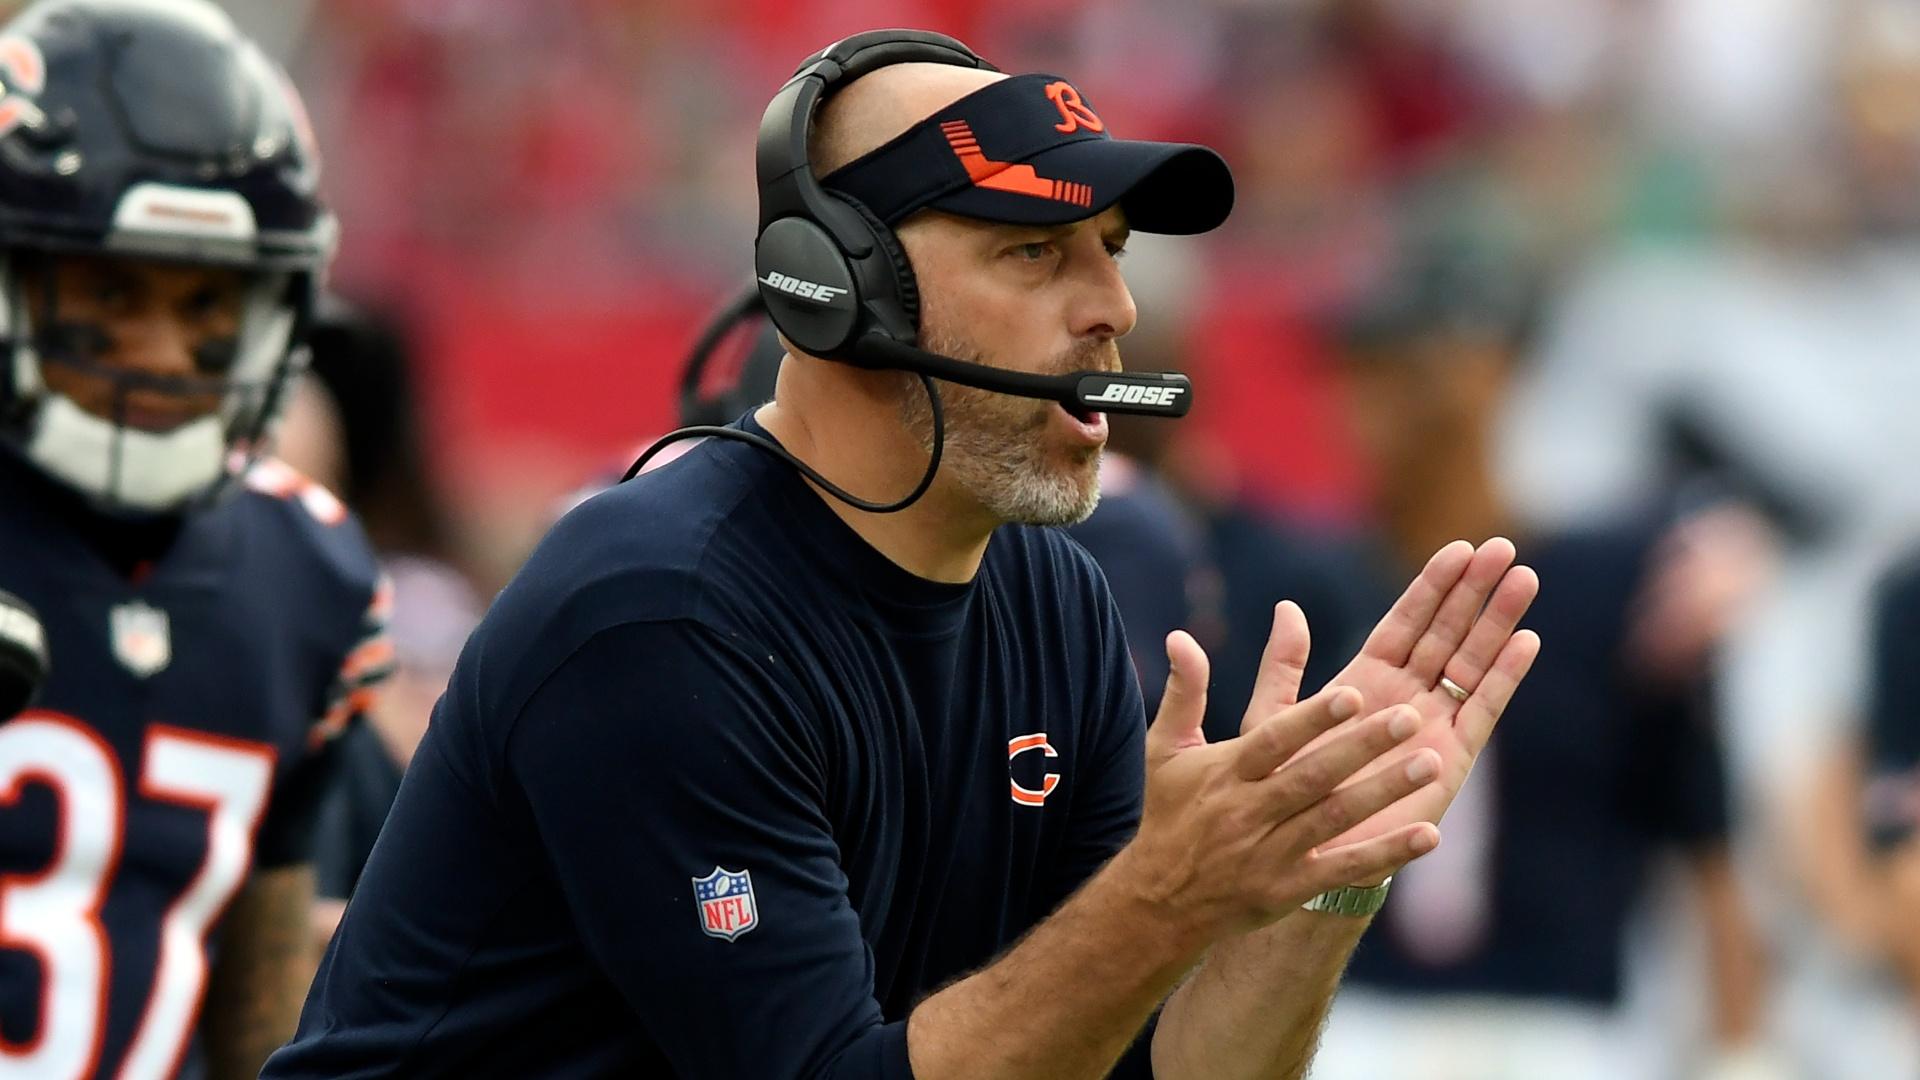 Bears Opt to Make Sweeping Changes, Fire GM Pace, Coach Nagy | Chicago News  | WTTW